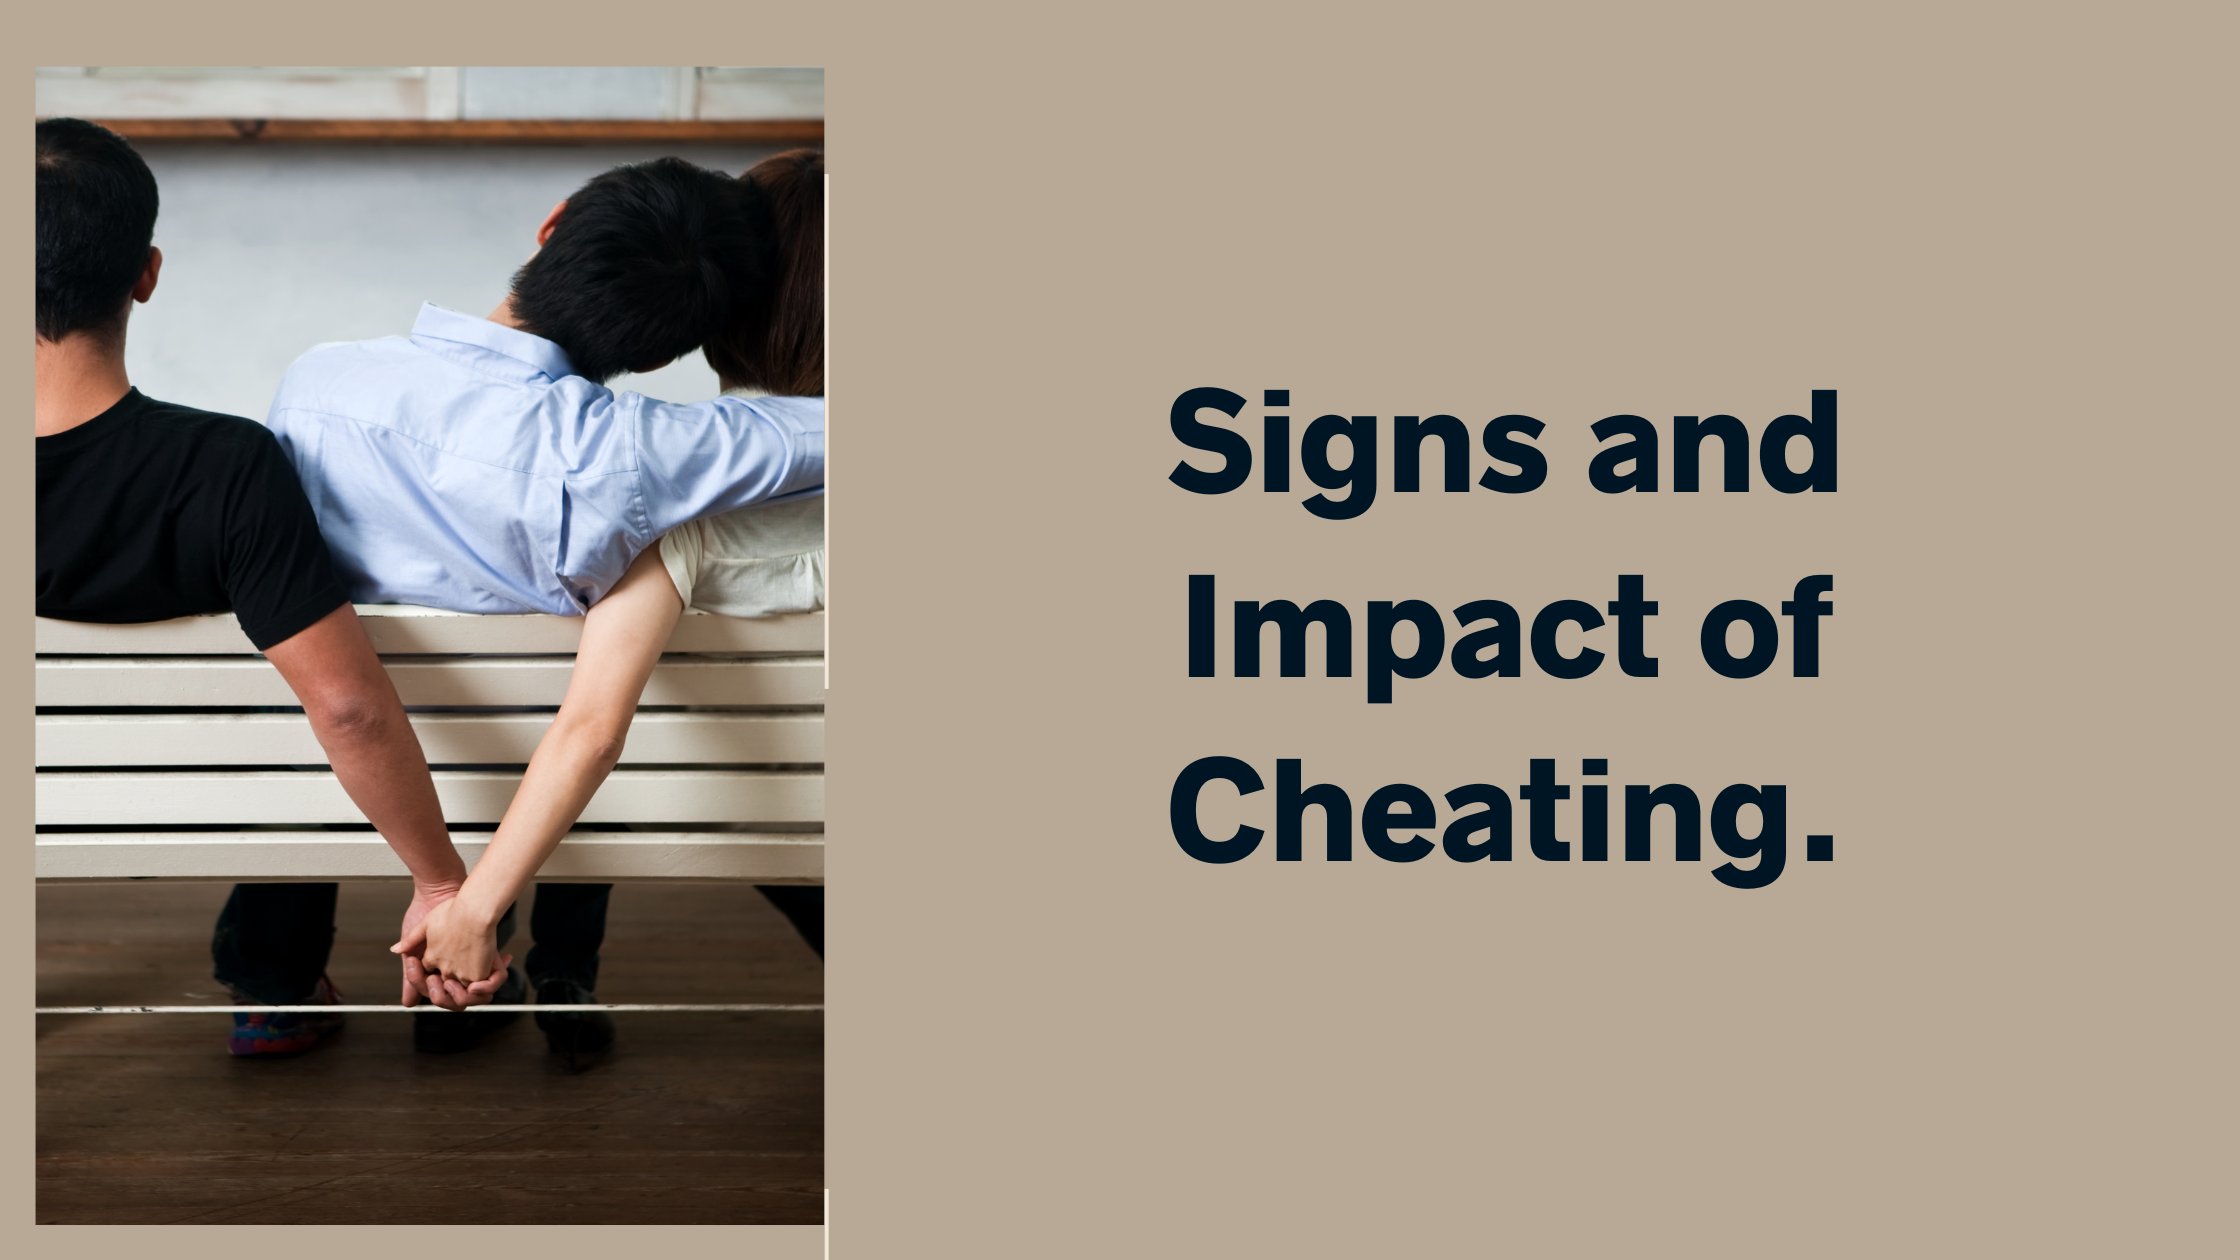 Signs and Impact of Cheating.